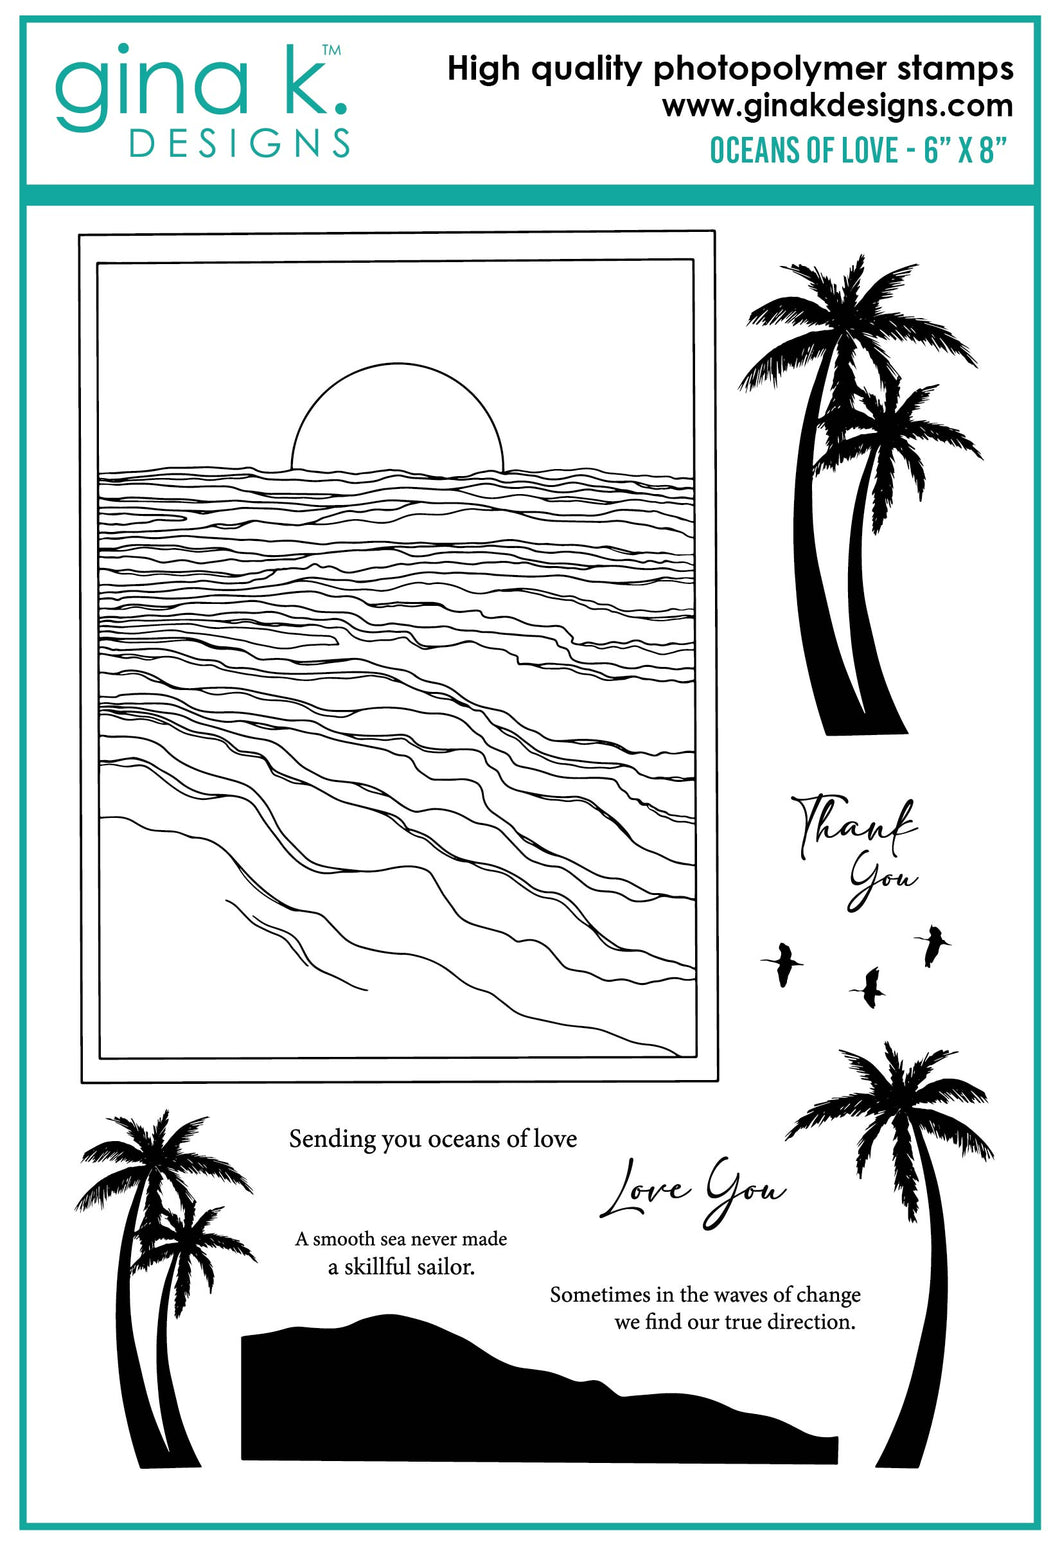 Gina K. designs - Stamps - Oceans Of Love. Oceans of Love is a stamp set by Hannah Drapinski. This set is made of premium clear photopolymer and measures 6